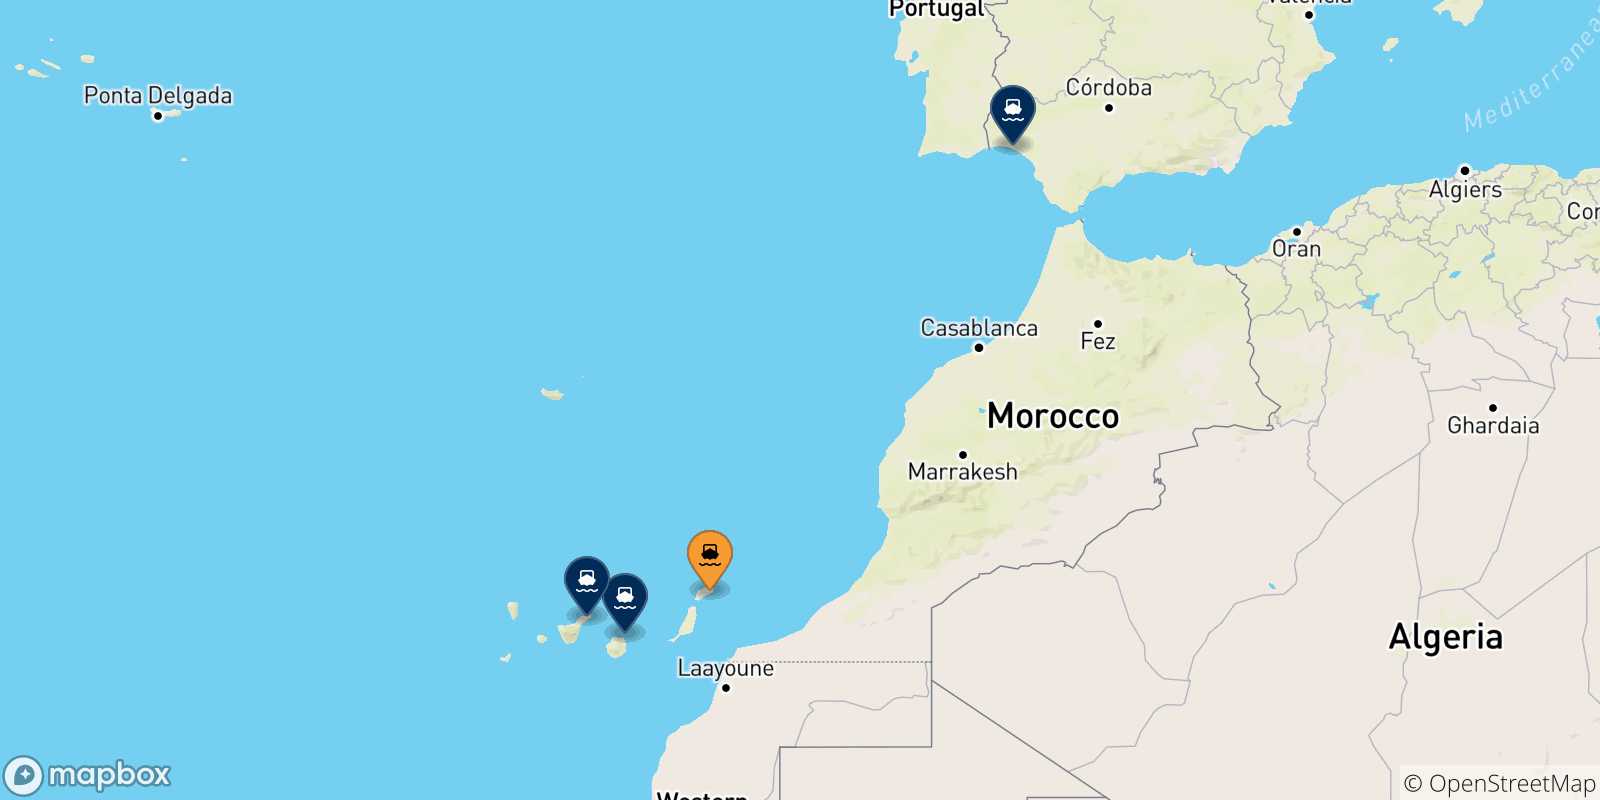 Map of the possible routes between Arrecife (Lanzarote) and Spain